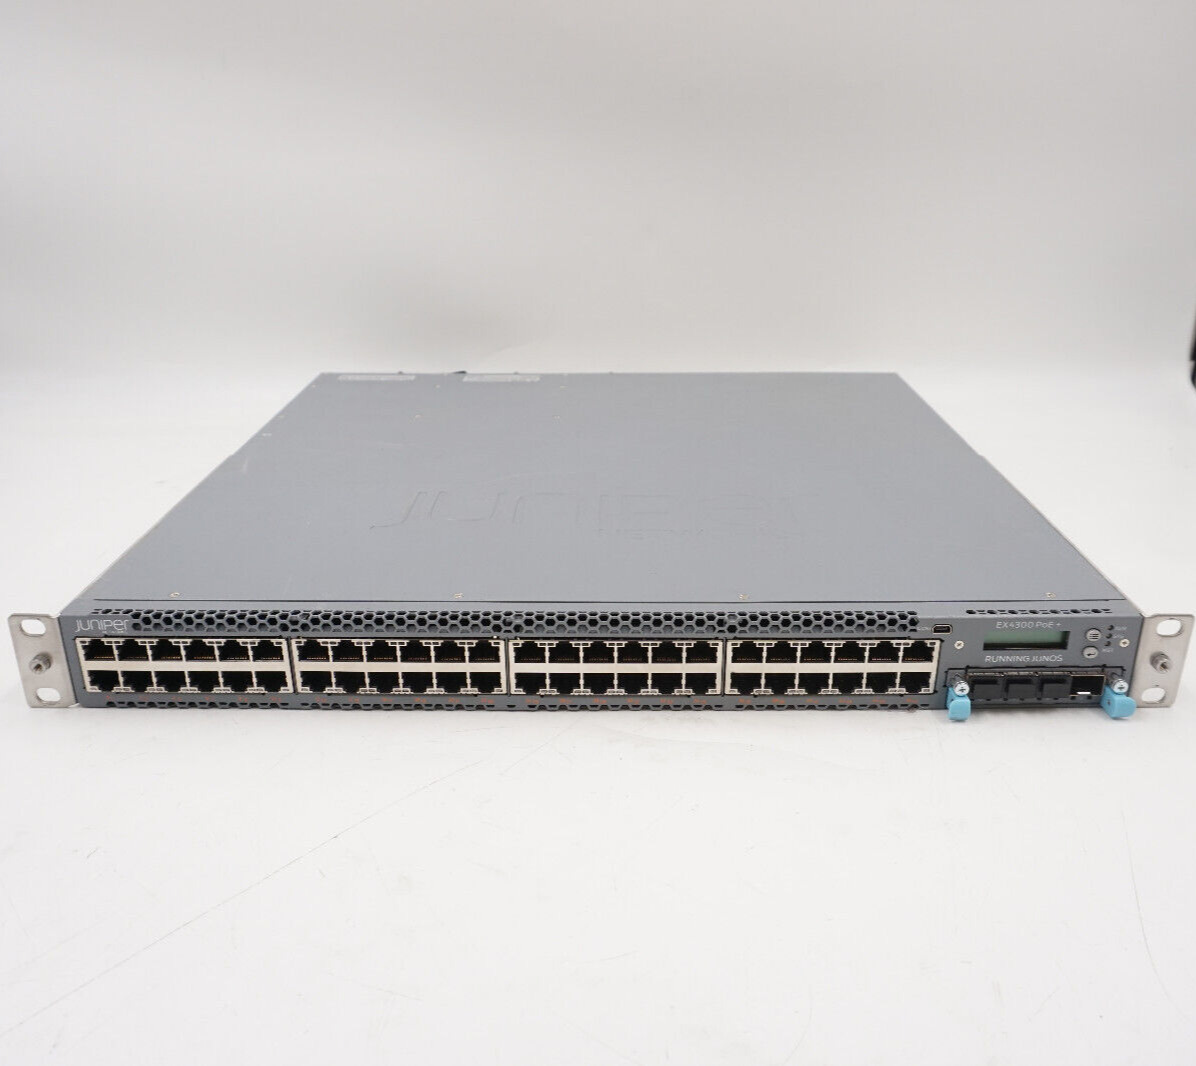 Juniper Networks EX4300-48P PoE+ 48-Port 4xSFP 2xPSU With Module Tested Working